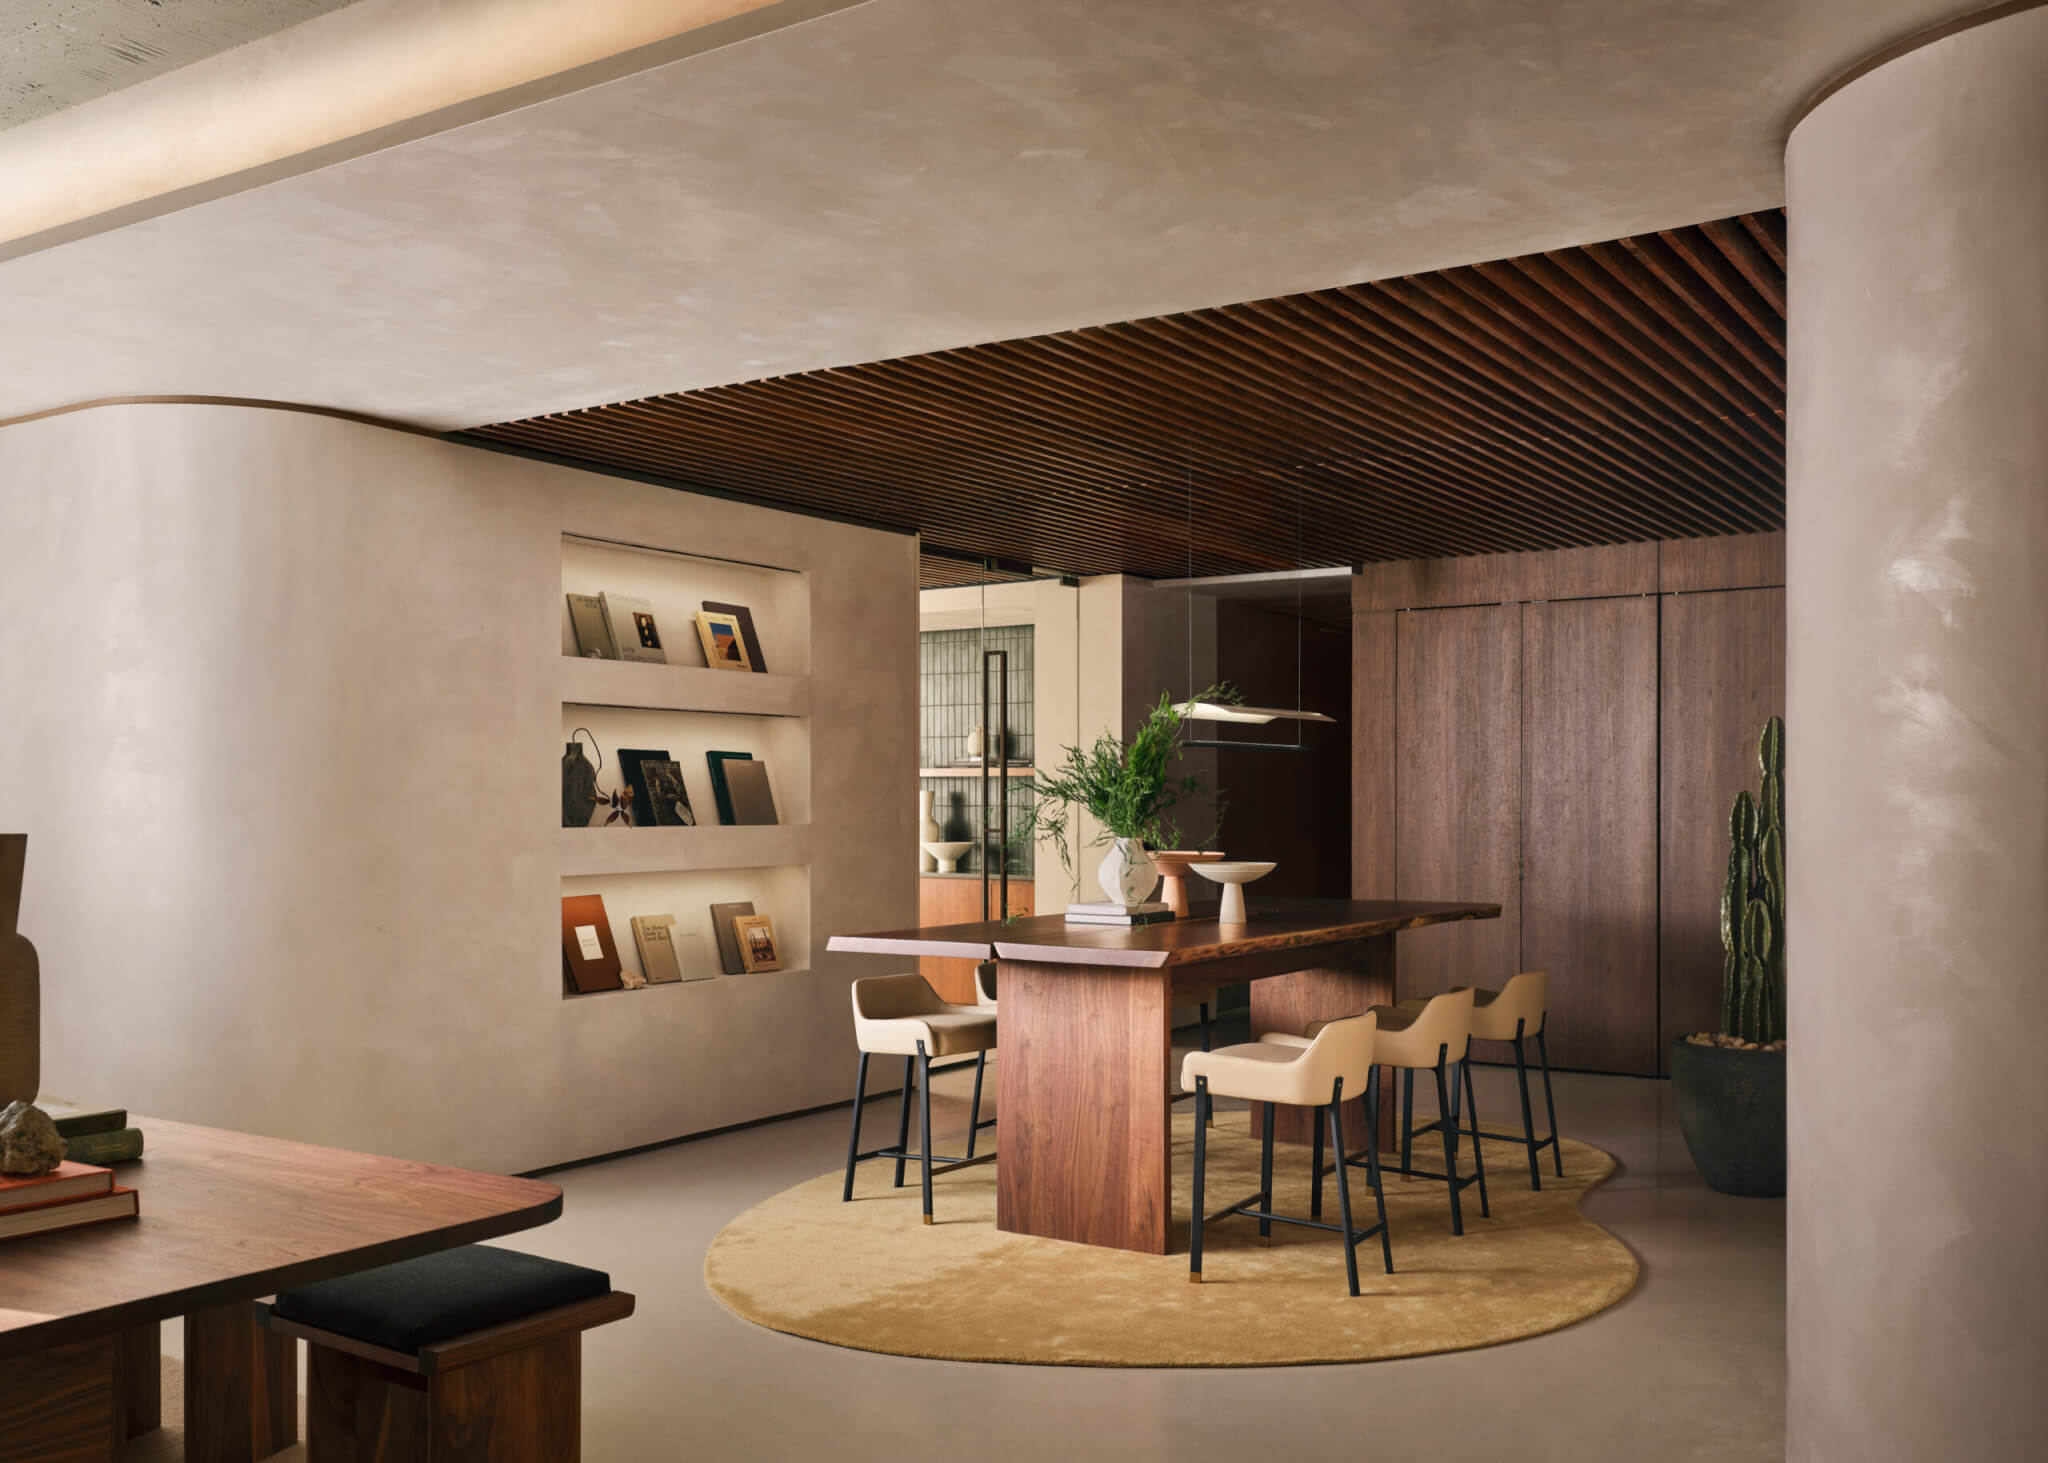 Fogarty Finger offers a serene work environment, Oasis at 767 Third Avenue, inspired by sand dunes